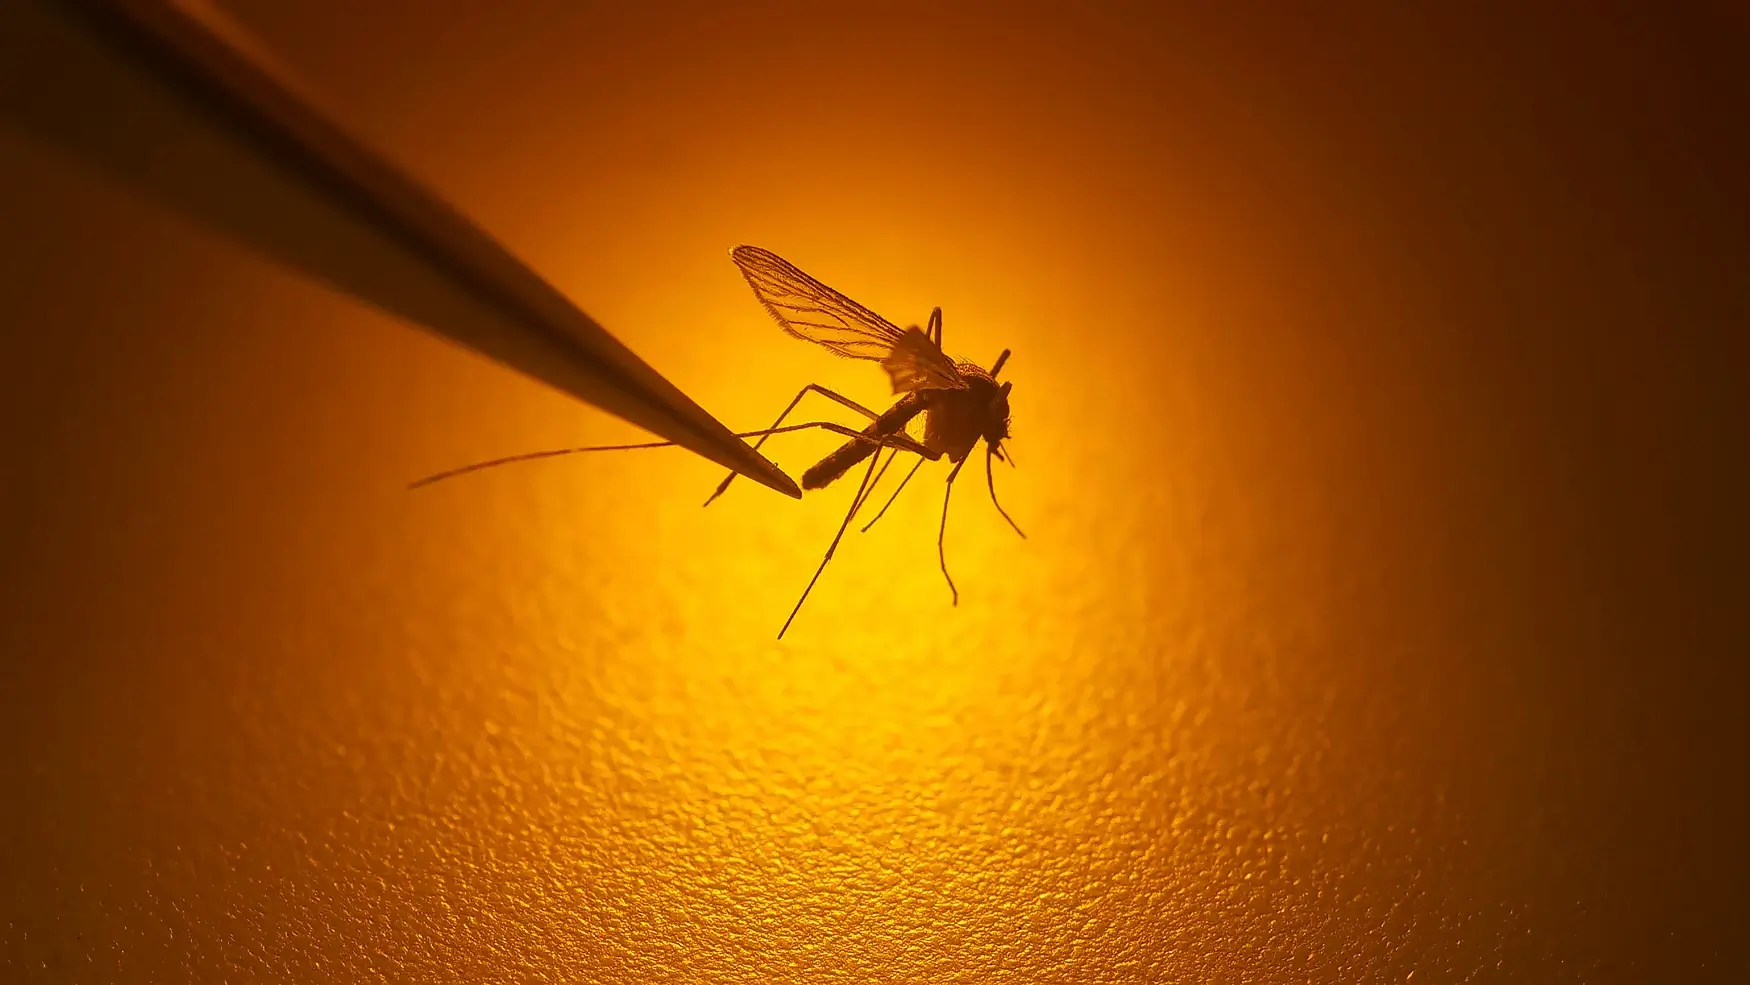 A mosquito sample just tested positive for West Nile virus in Houston. Here’s what to know.